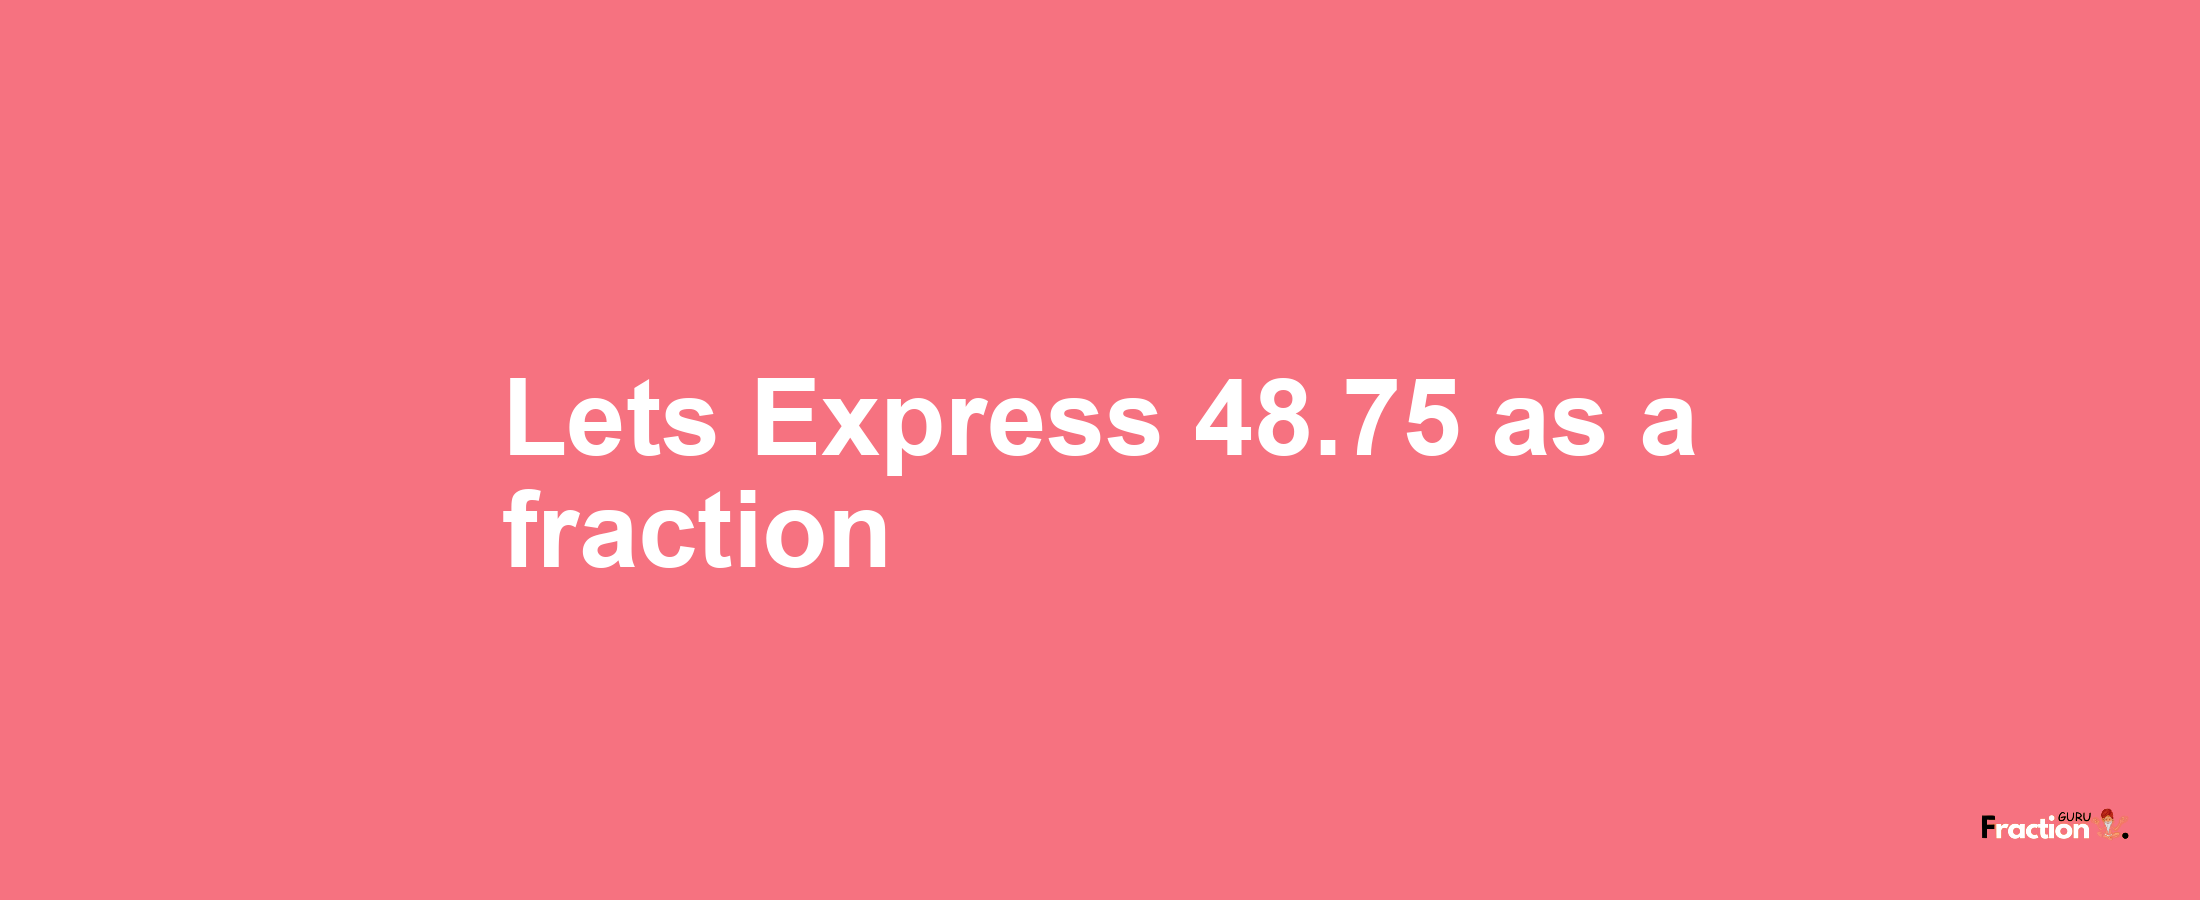 Lets Express 48.75 as afraction